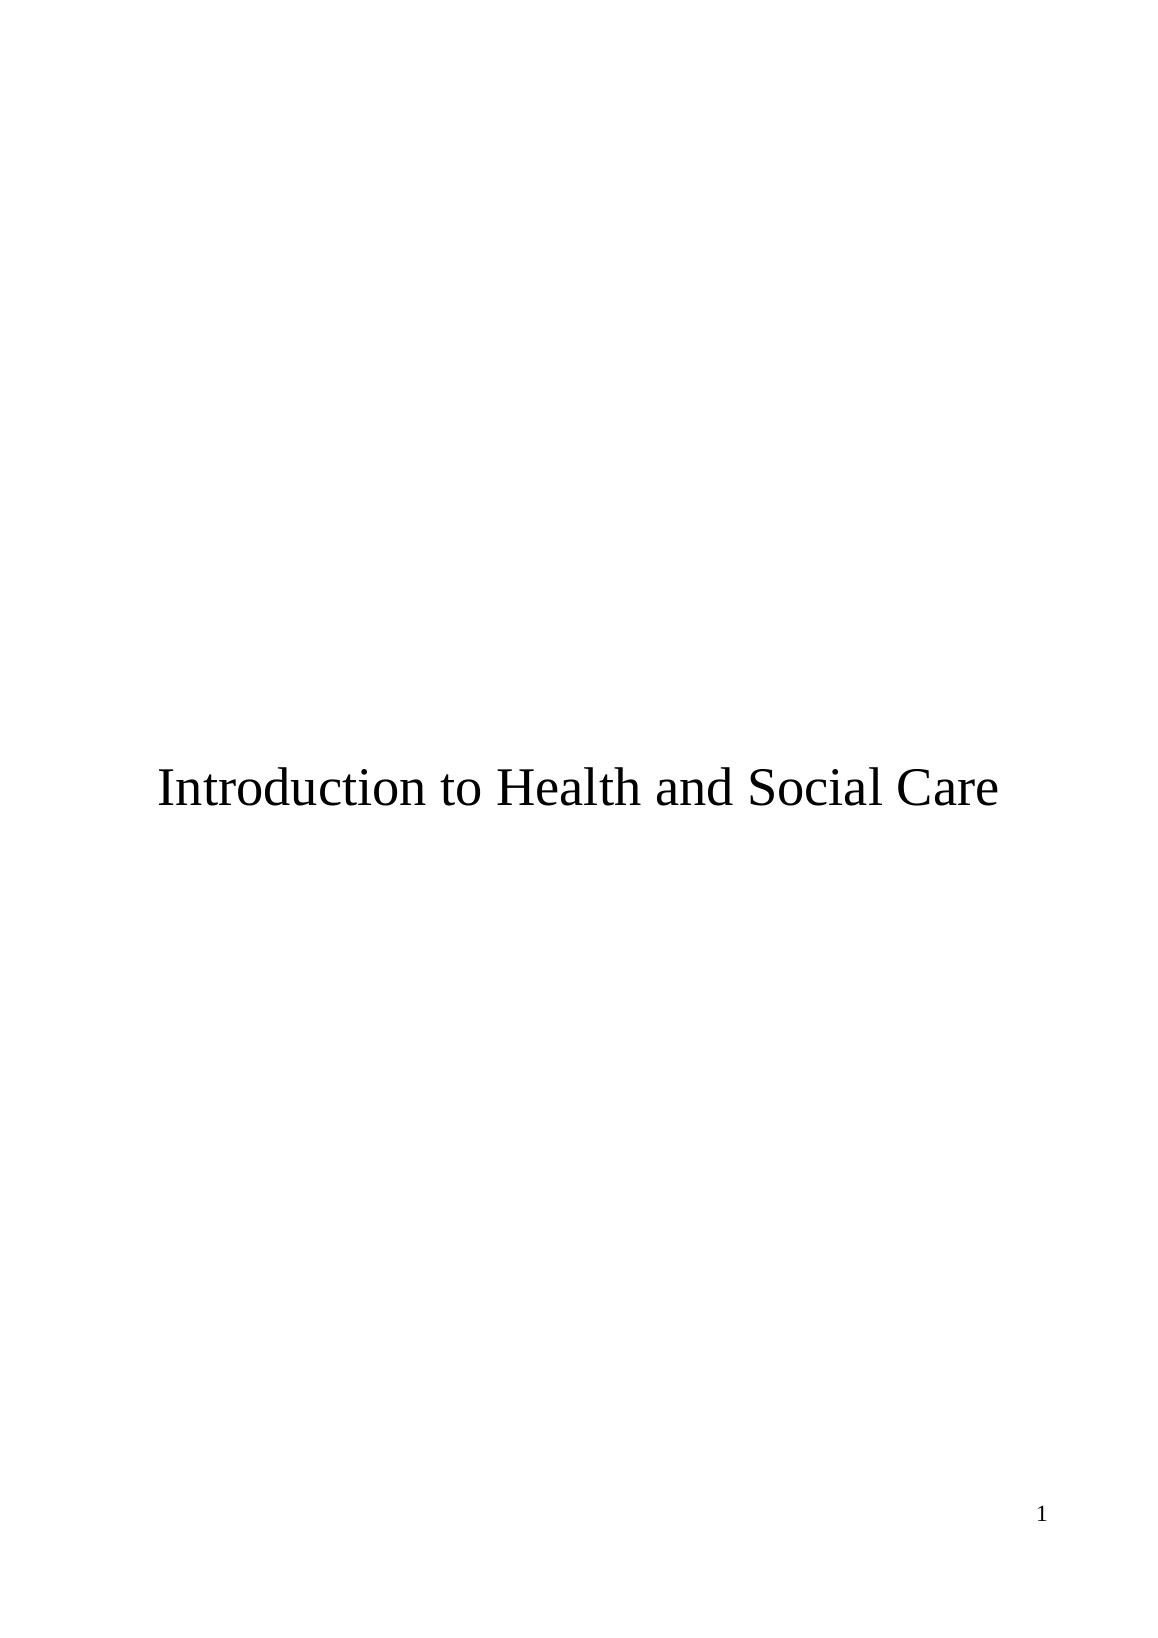 Introduction to Health and Social Care_1